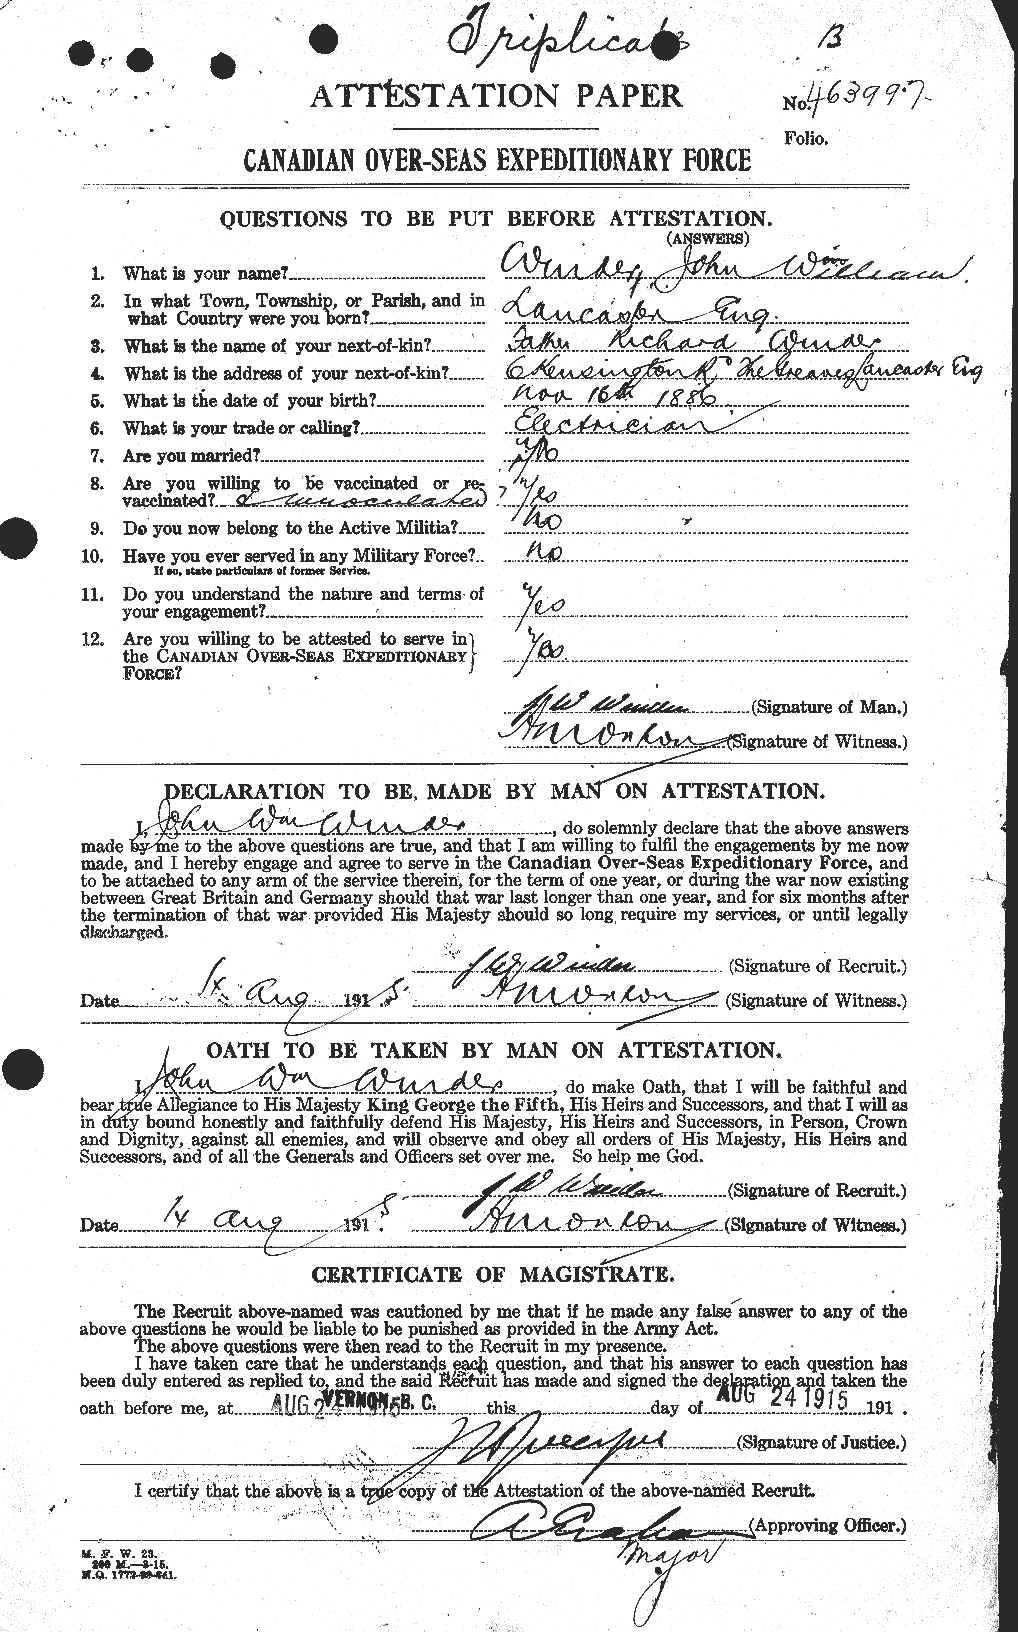 Personnel Records of the First World War - CEF 667300a